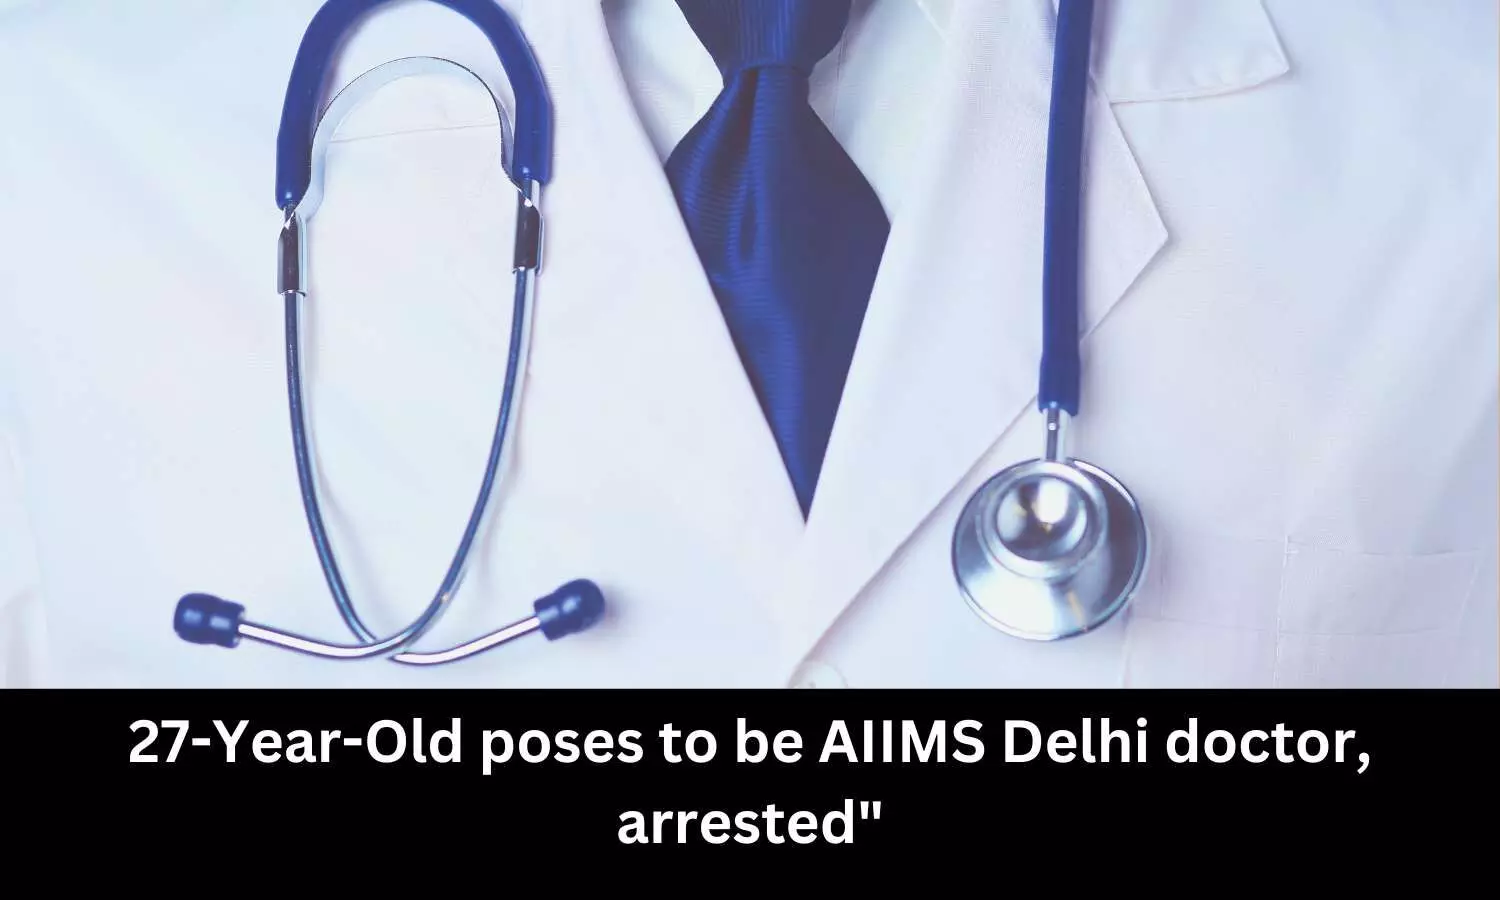 Woman arrested for posing as AIIMS doctor, duping man of  Rs 1 lakh